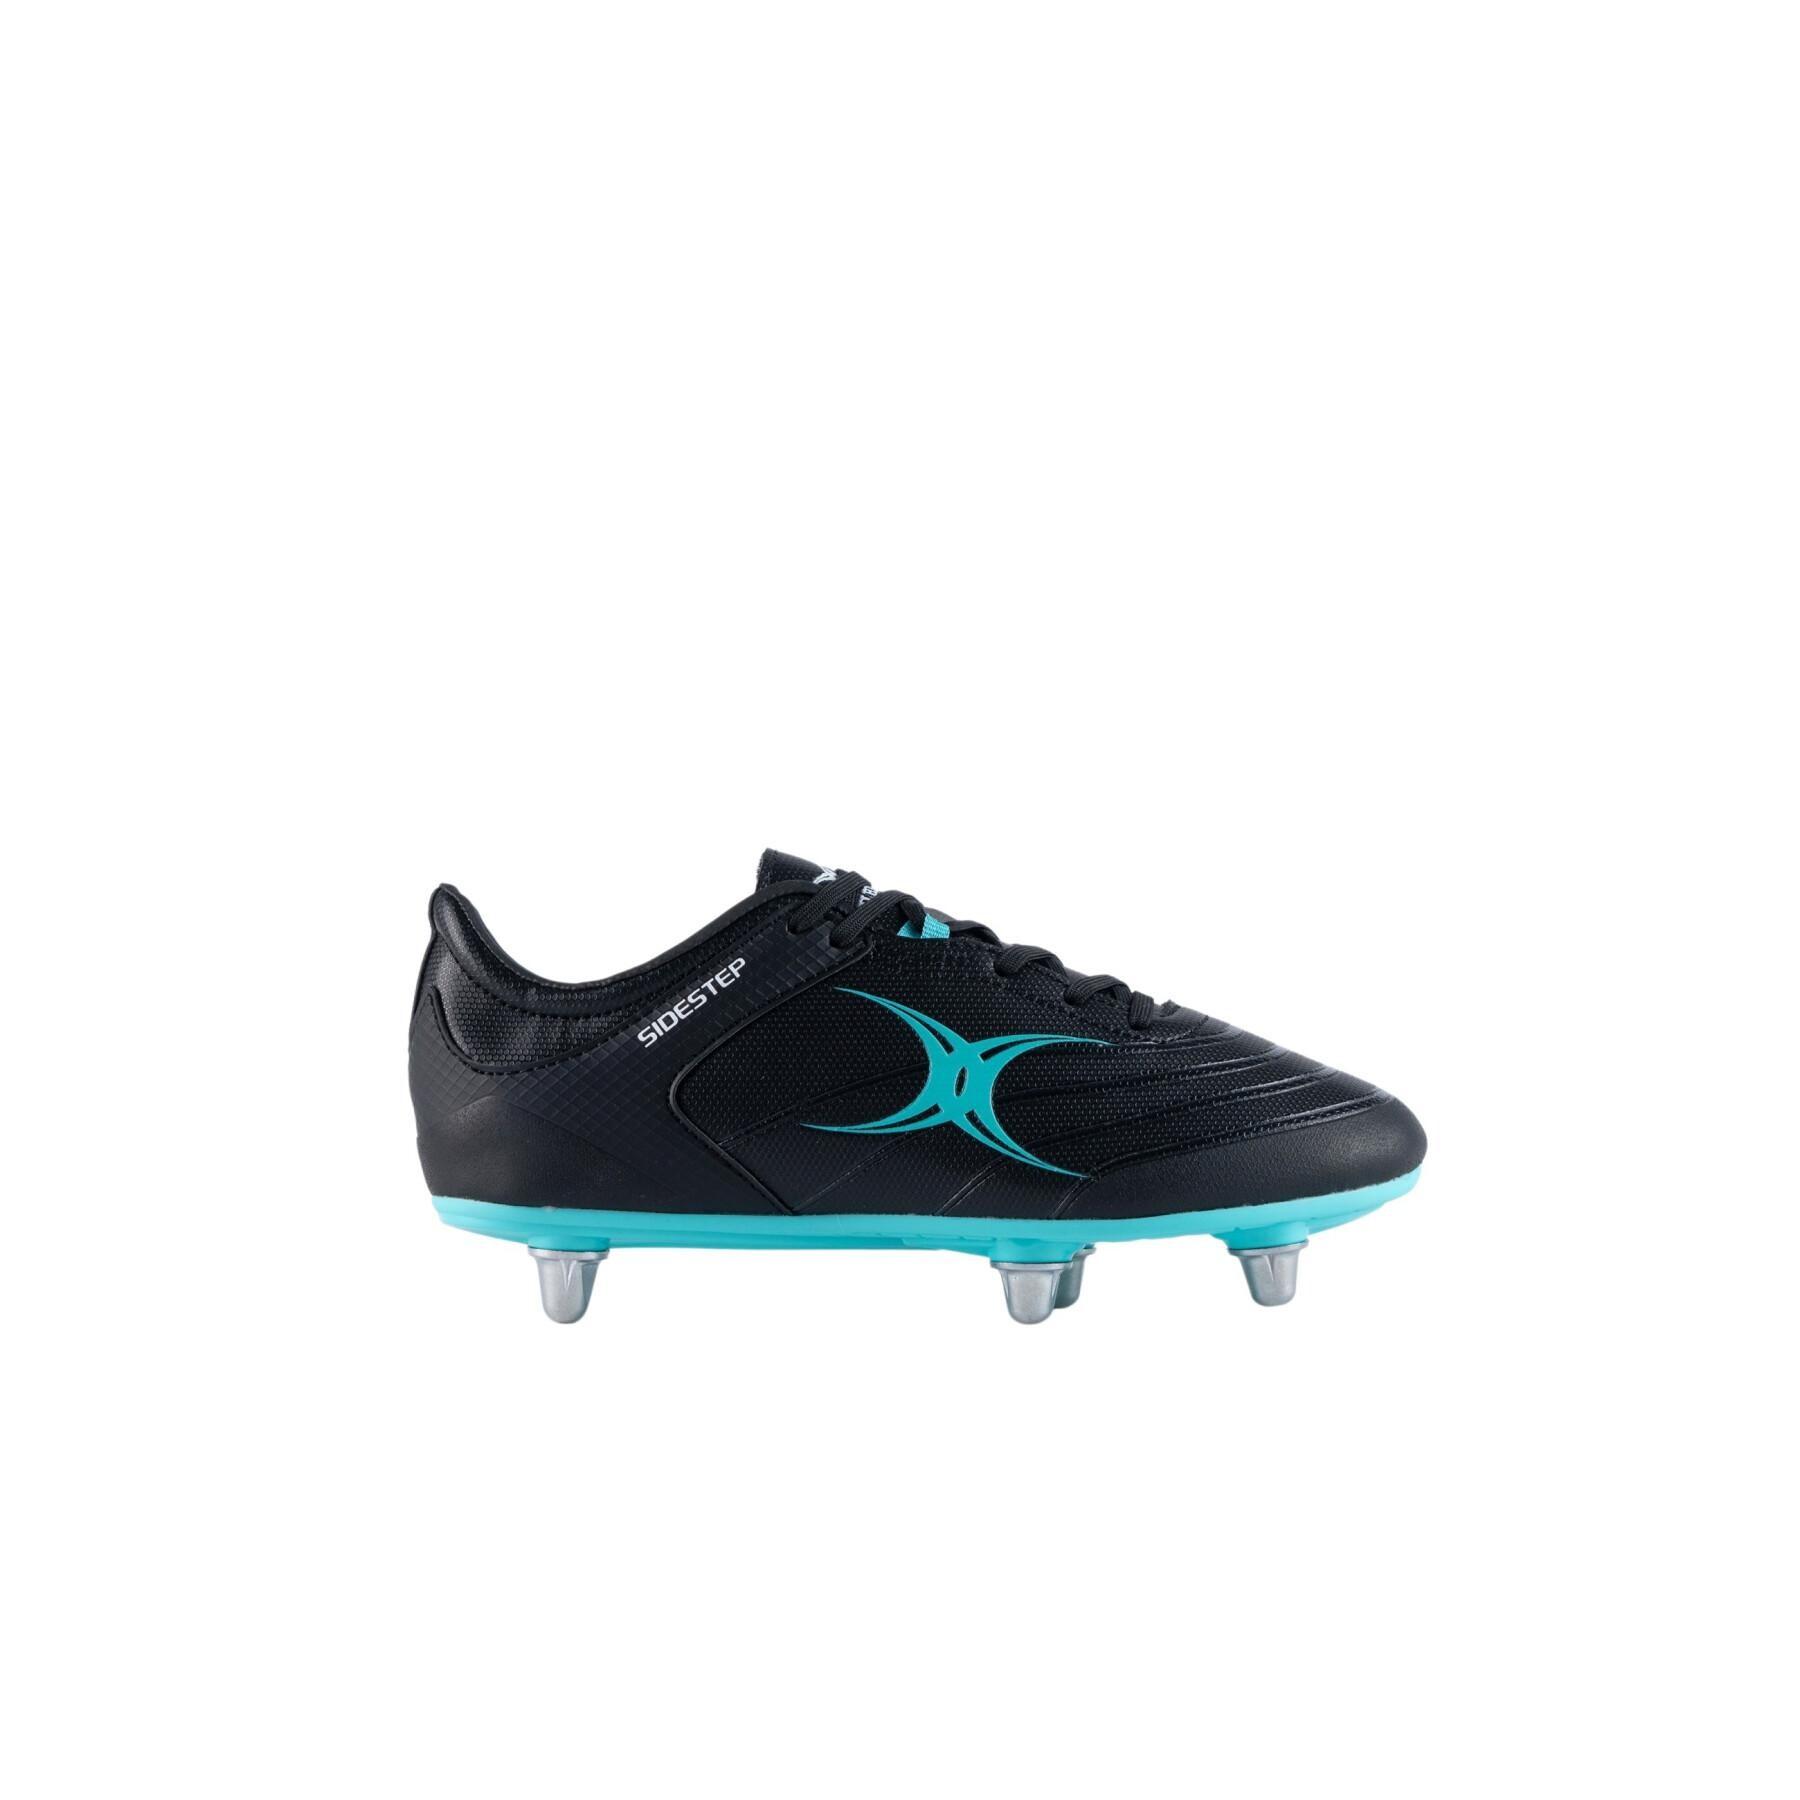 Kids rugby shoes Gilbert Sidestep X15 LO 6S